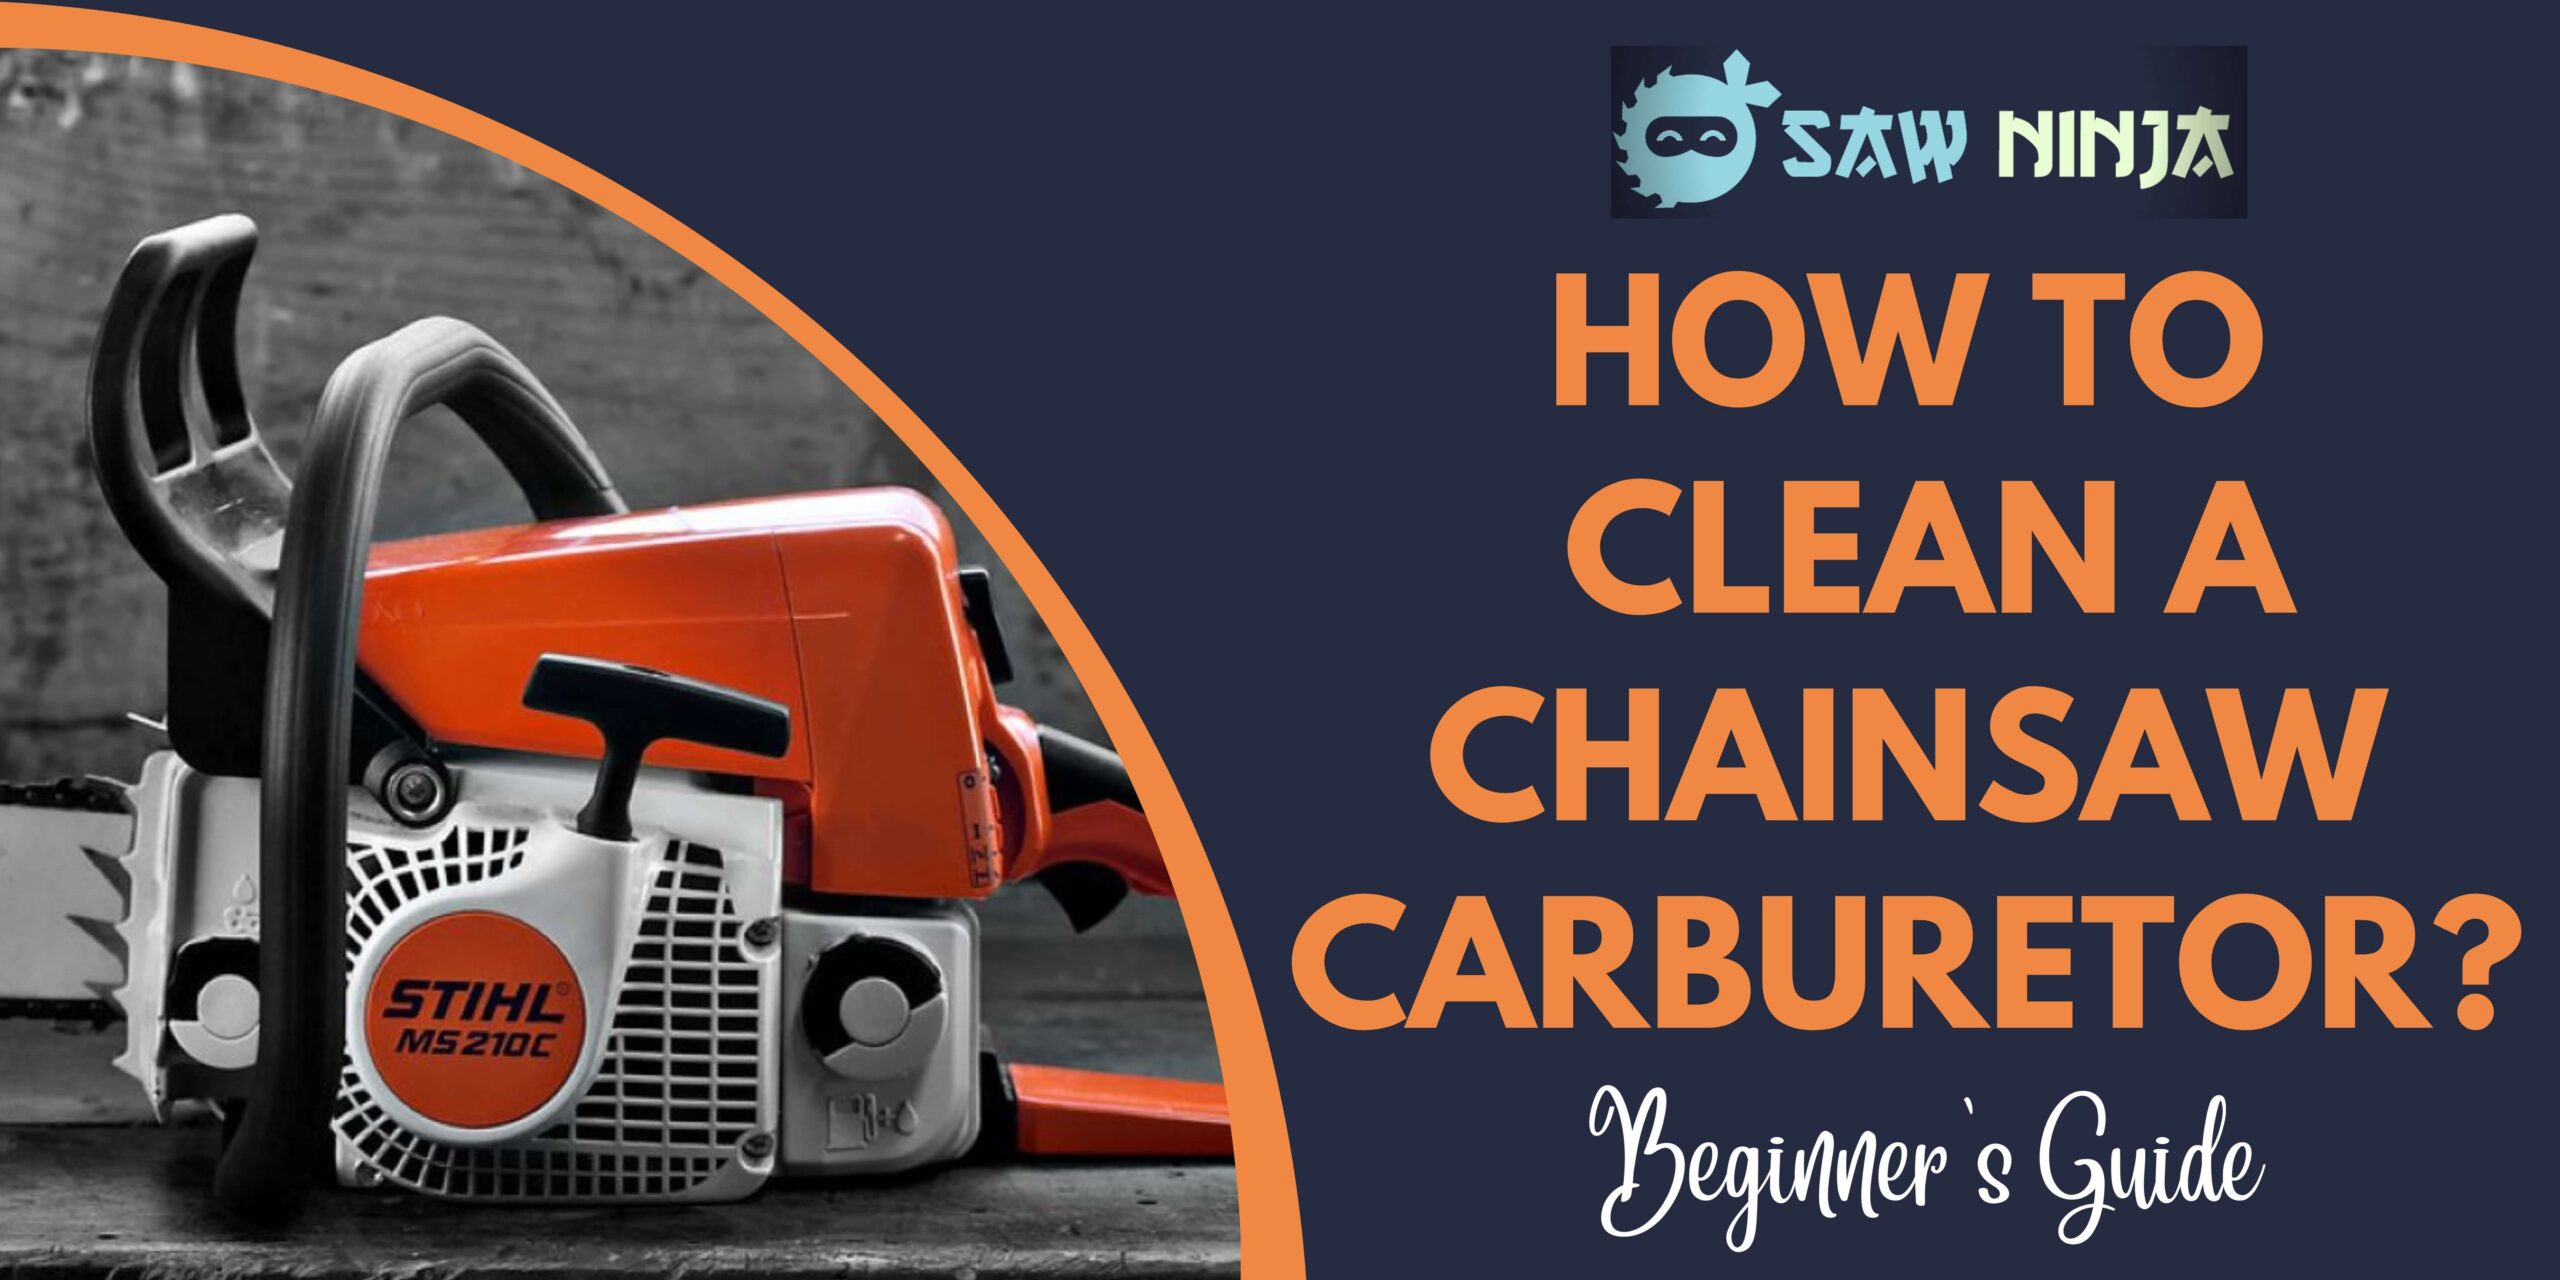 How to Clean a Chainsaw Carburetor